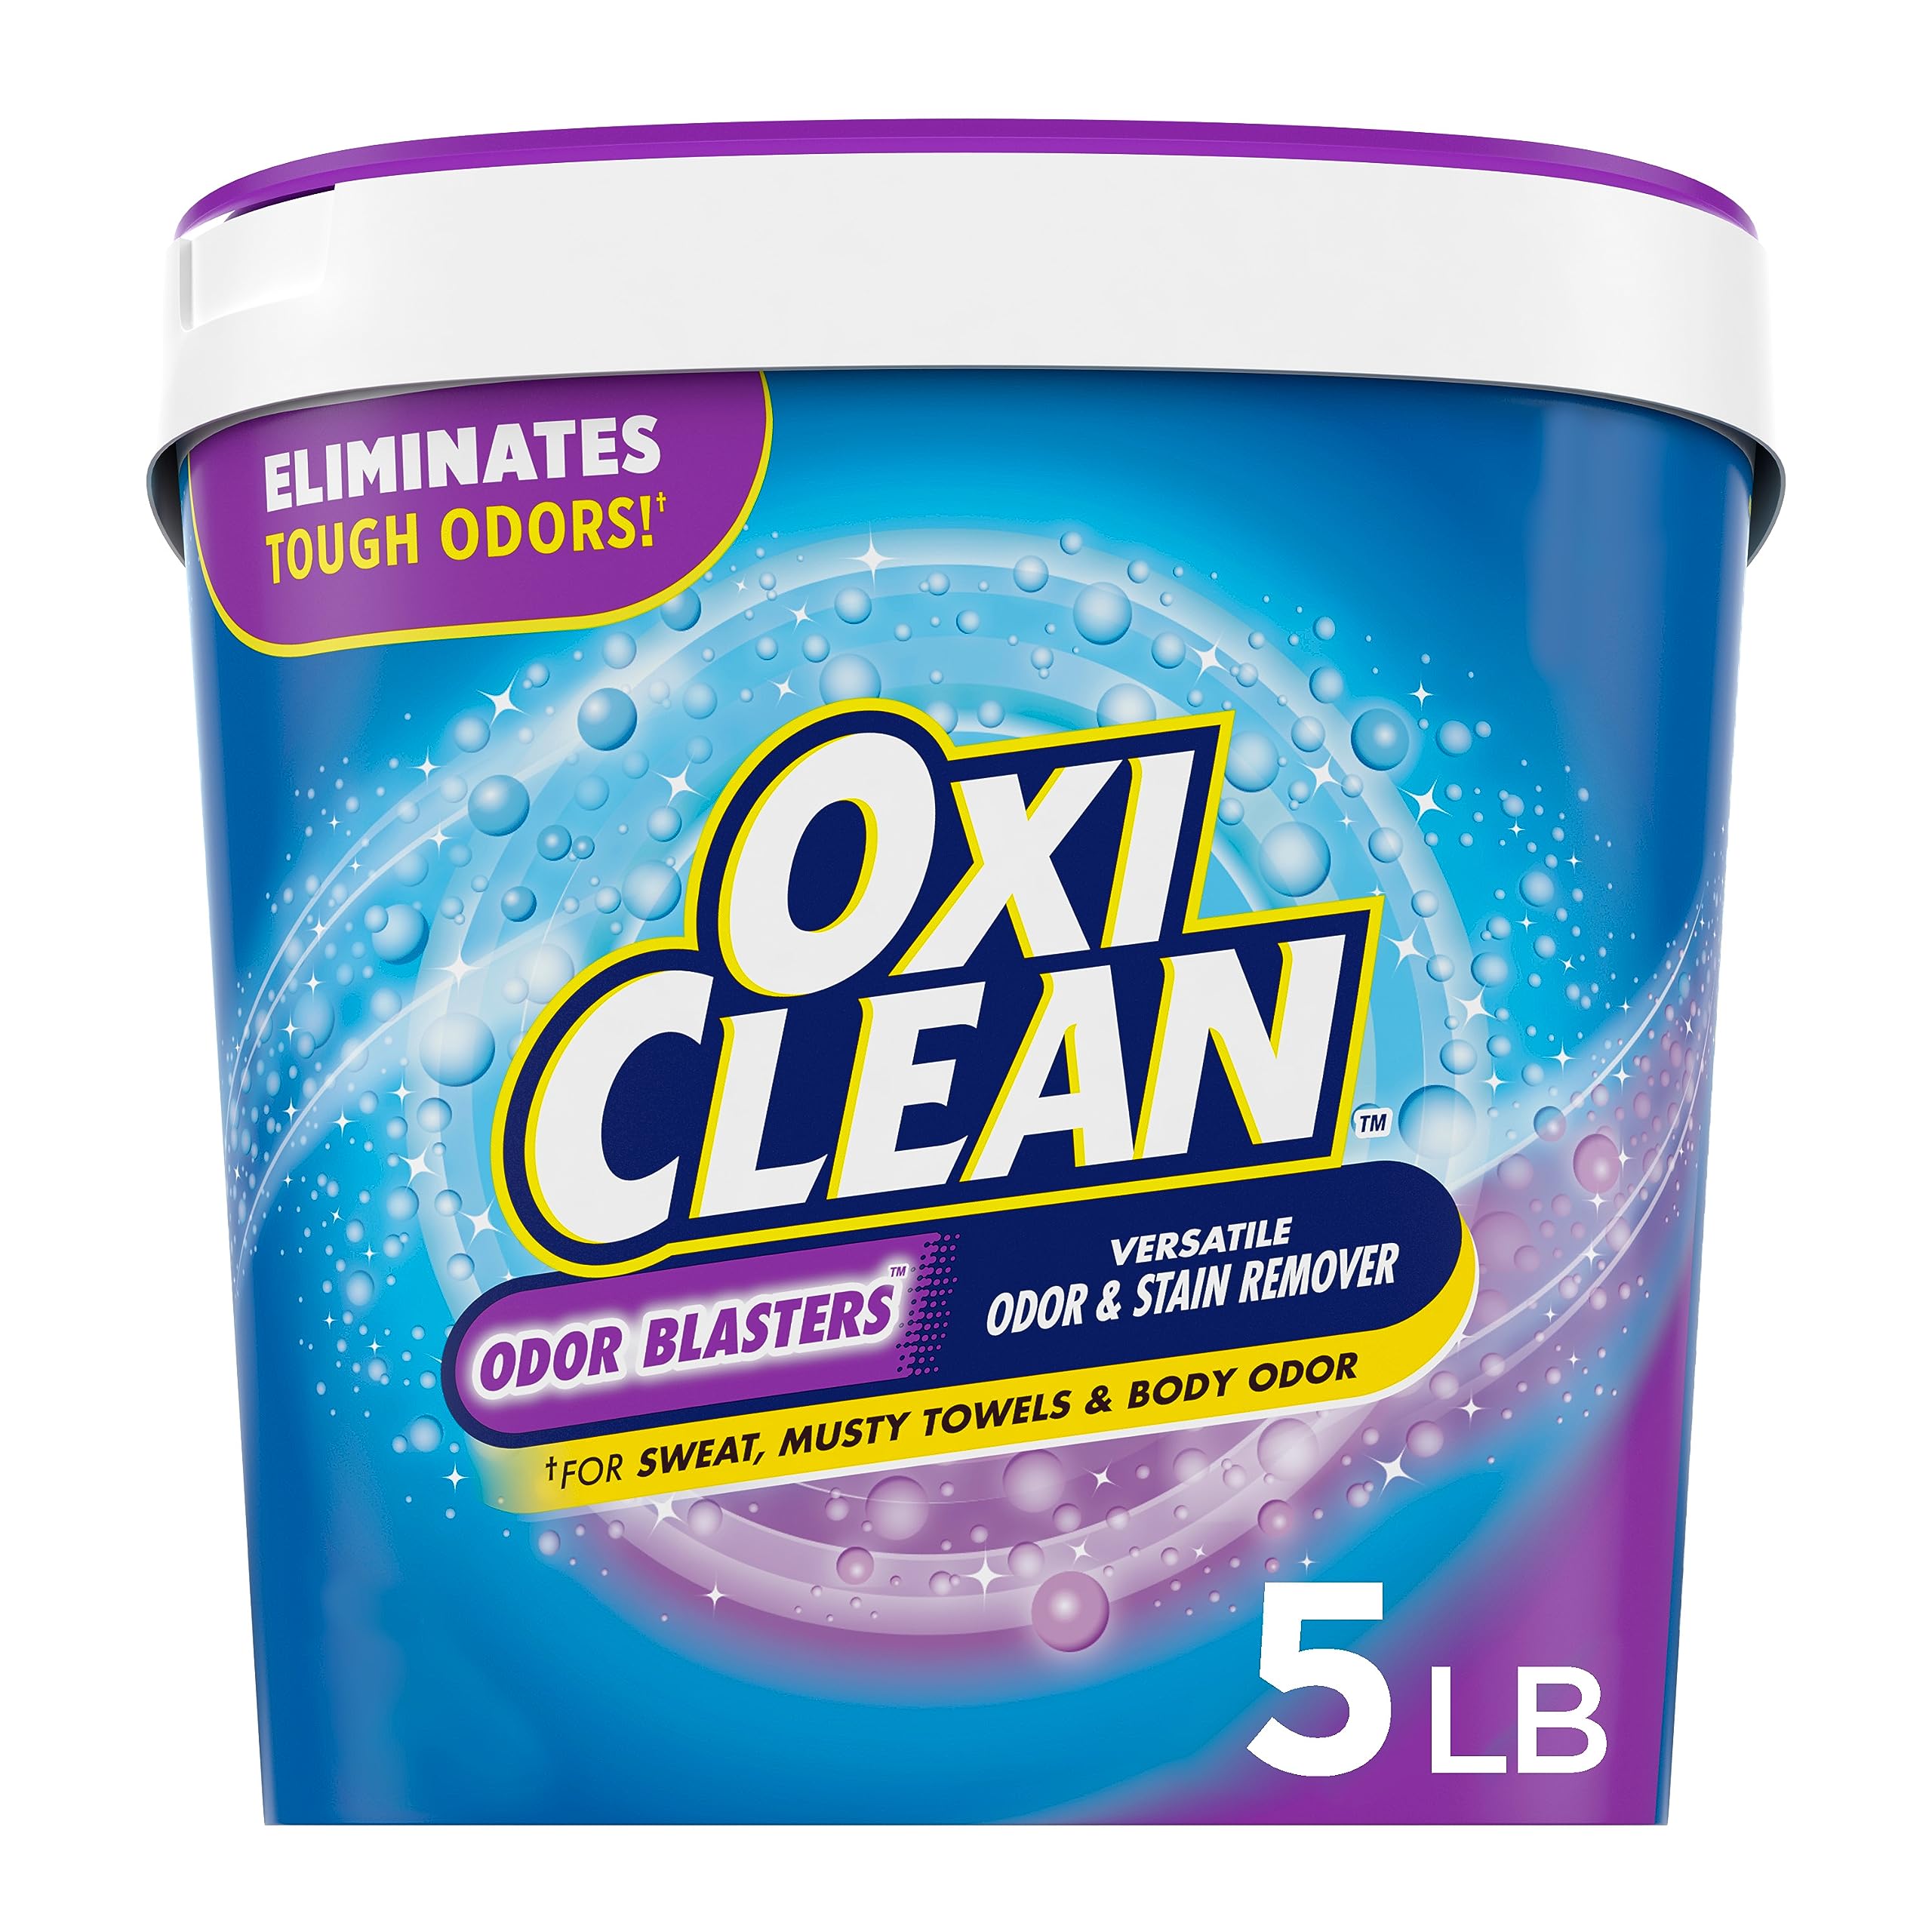 5-Lb. OxiClean Versatile/Odor Blasters Odor & Stain Remover Laundry Powder 3 for $23.57 ($7.86 each) + Free Shipping w/ Prime or on $35+